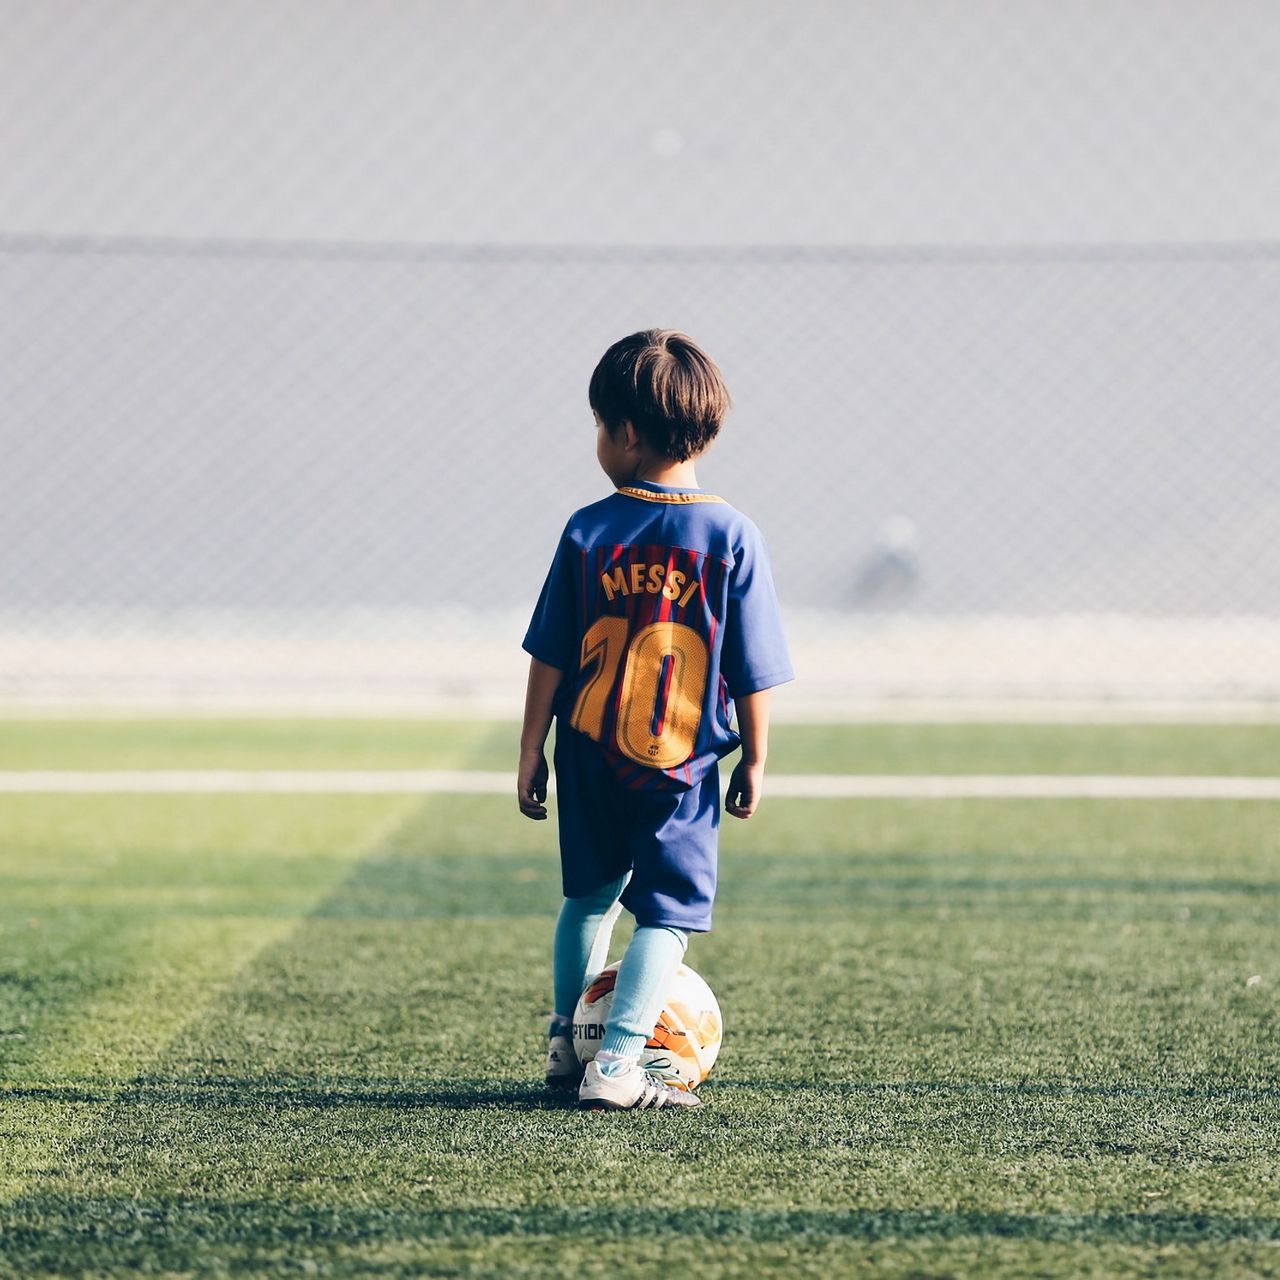 Download wallpaper 1280x1280 child, football player, football, football  field, ball, lawn ipad, ipad 2, ipad mini for parallax hd background